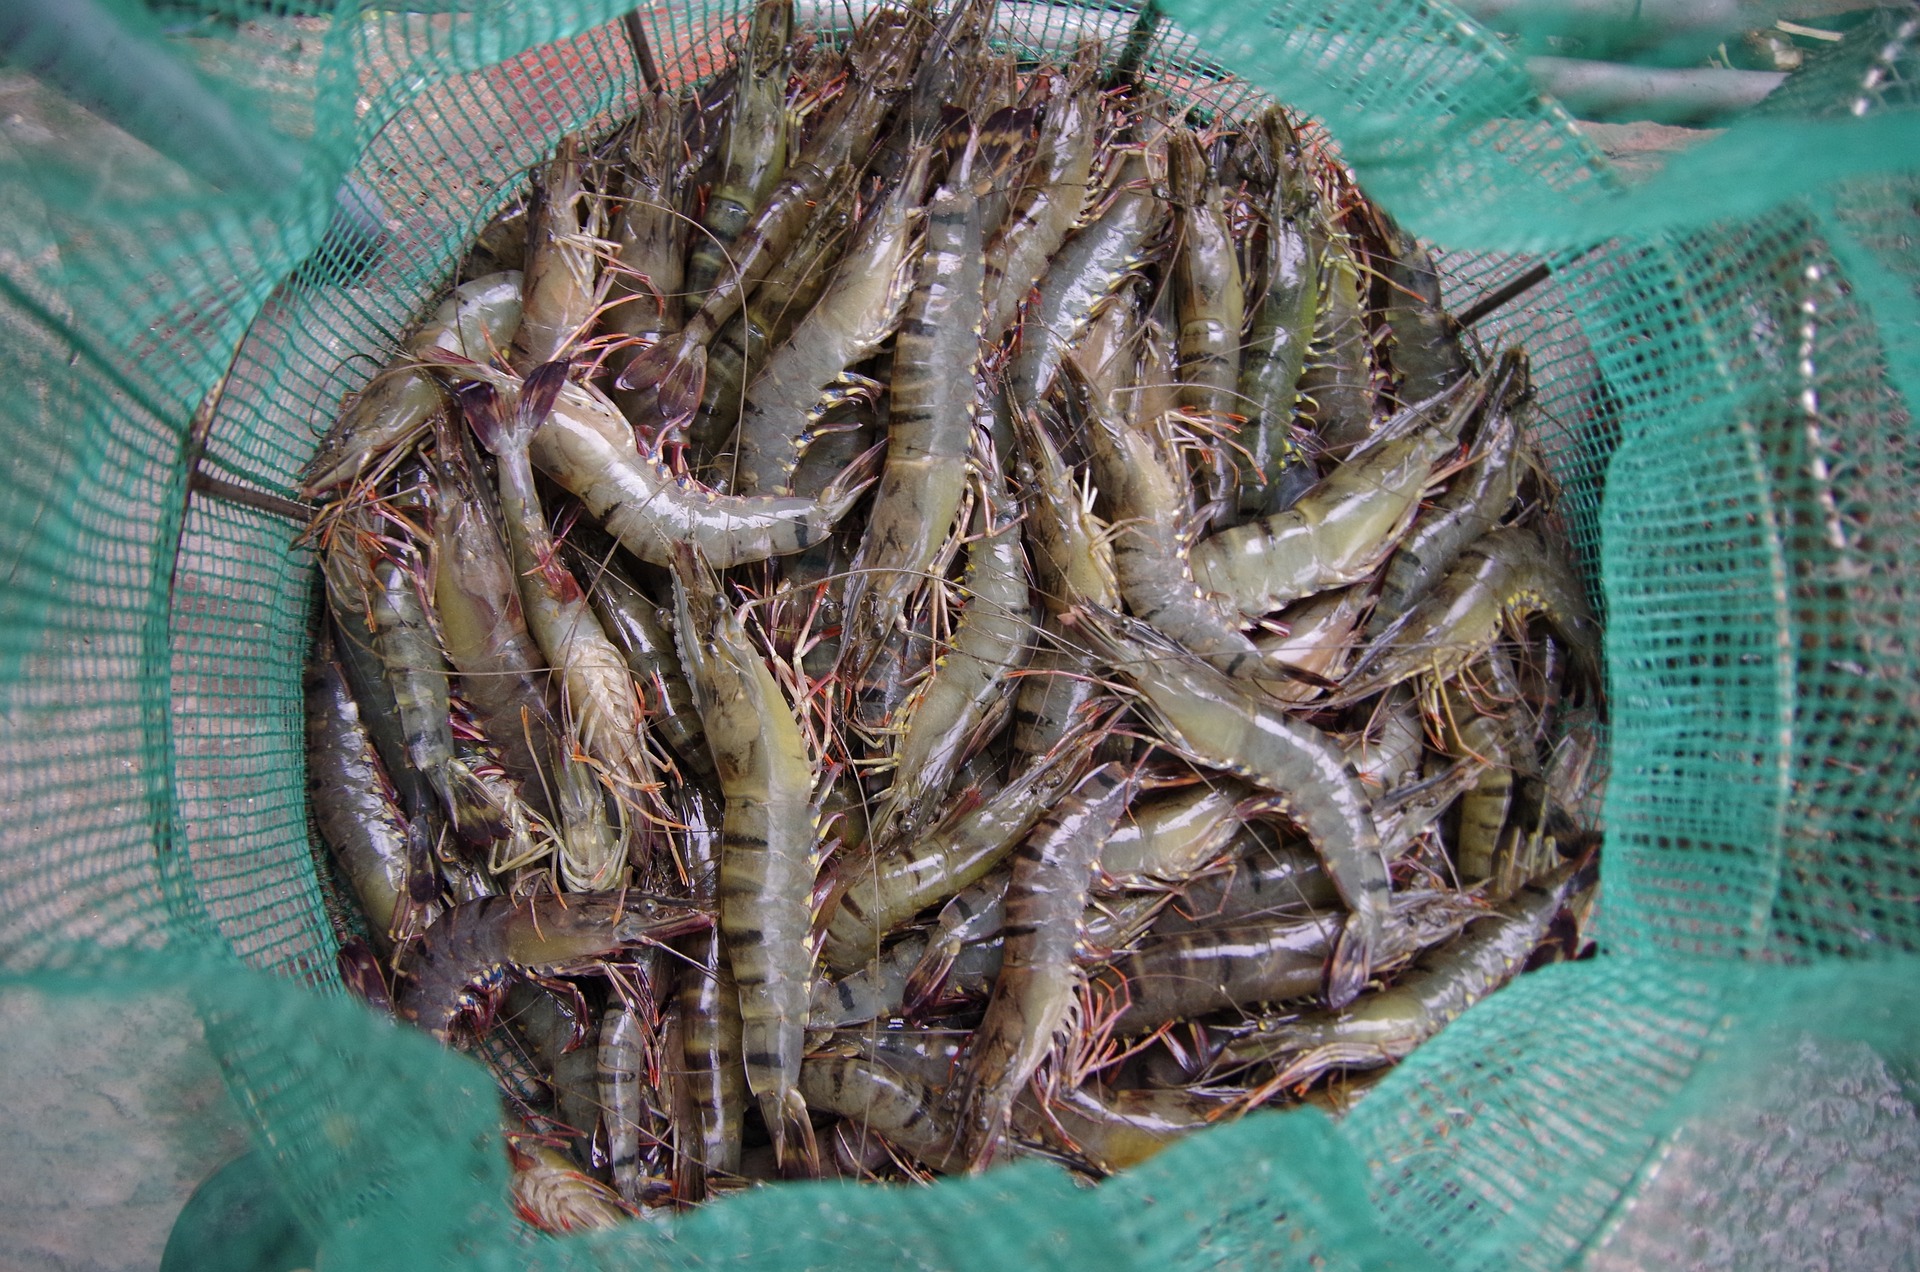 A host of factors — some external and some internal — have come into play to force Andhra Pradesh shrimp farmers into opting for distress sales or destroying their produce. (Creative Commons)